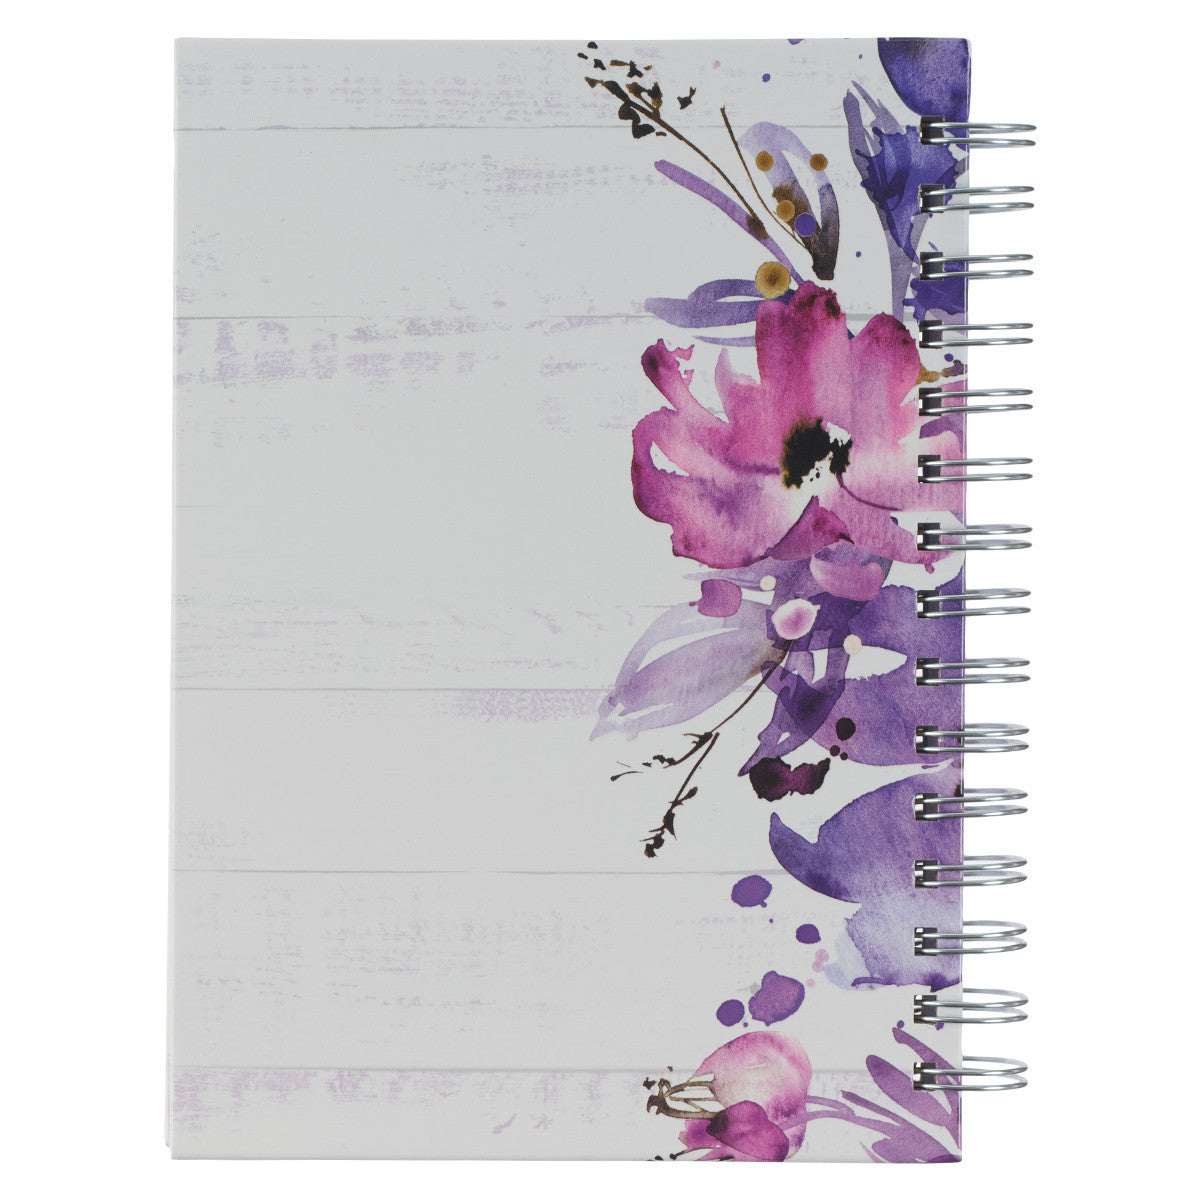 Trust in the Lord Purple Floral Garland Large Wirebound Journal - Proverbs 3:5 - The Christian Gift Company